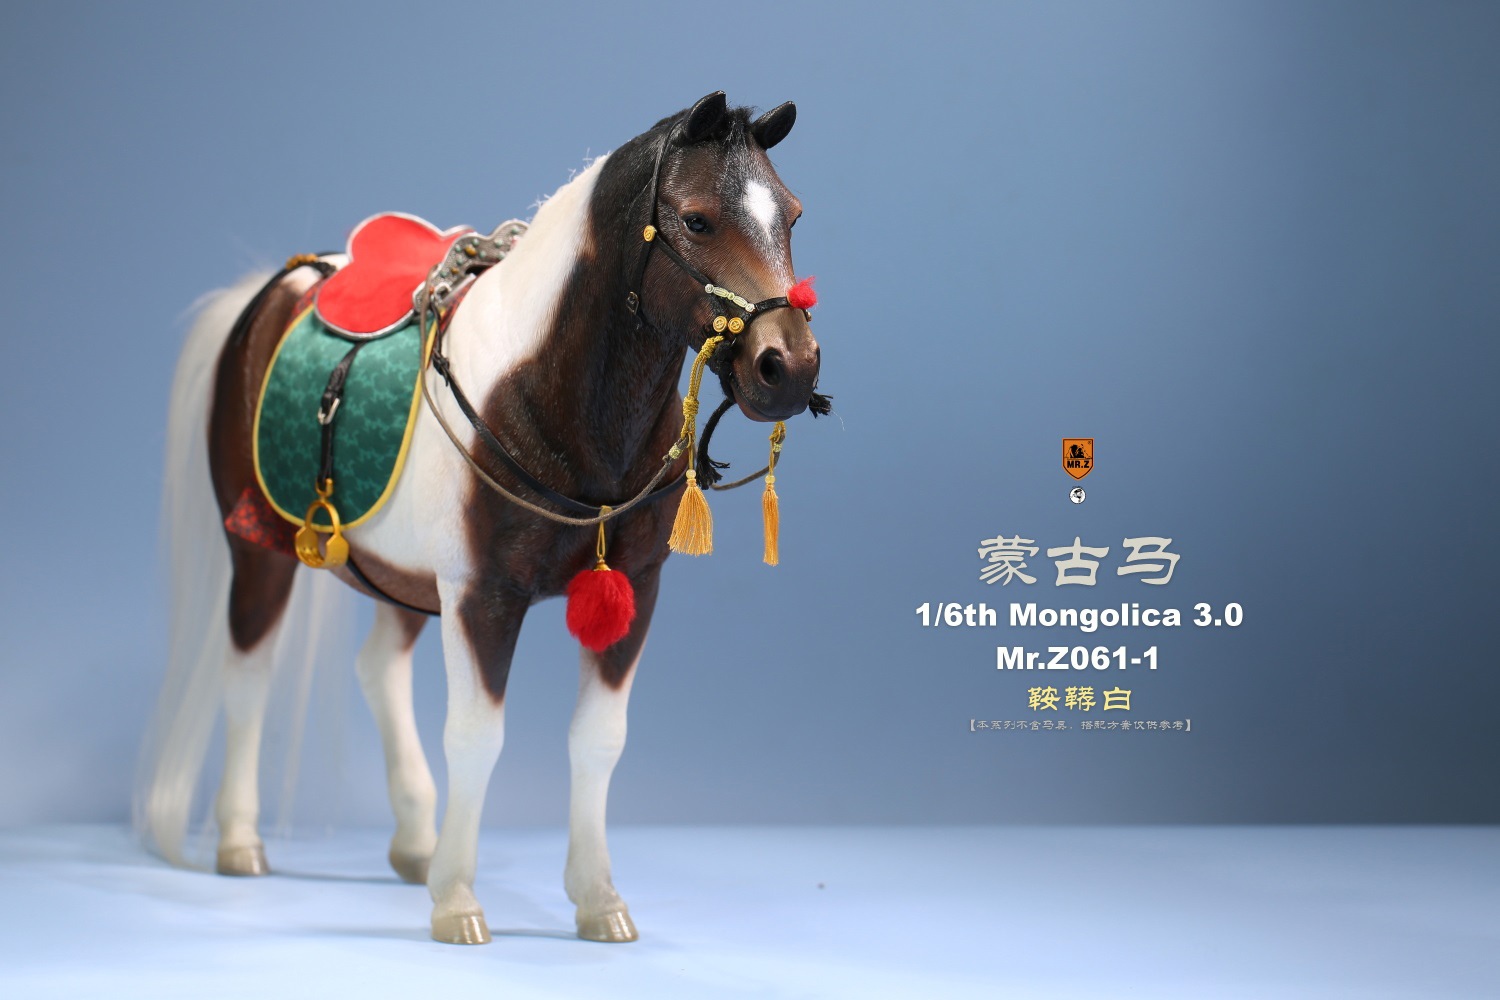 NEW PRODUCT: MR.Z - No. 61 - Mongolian horse set of 8 colors #Z061 & classical harness #DT001-S 2181